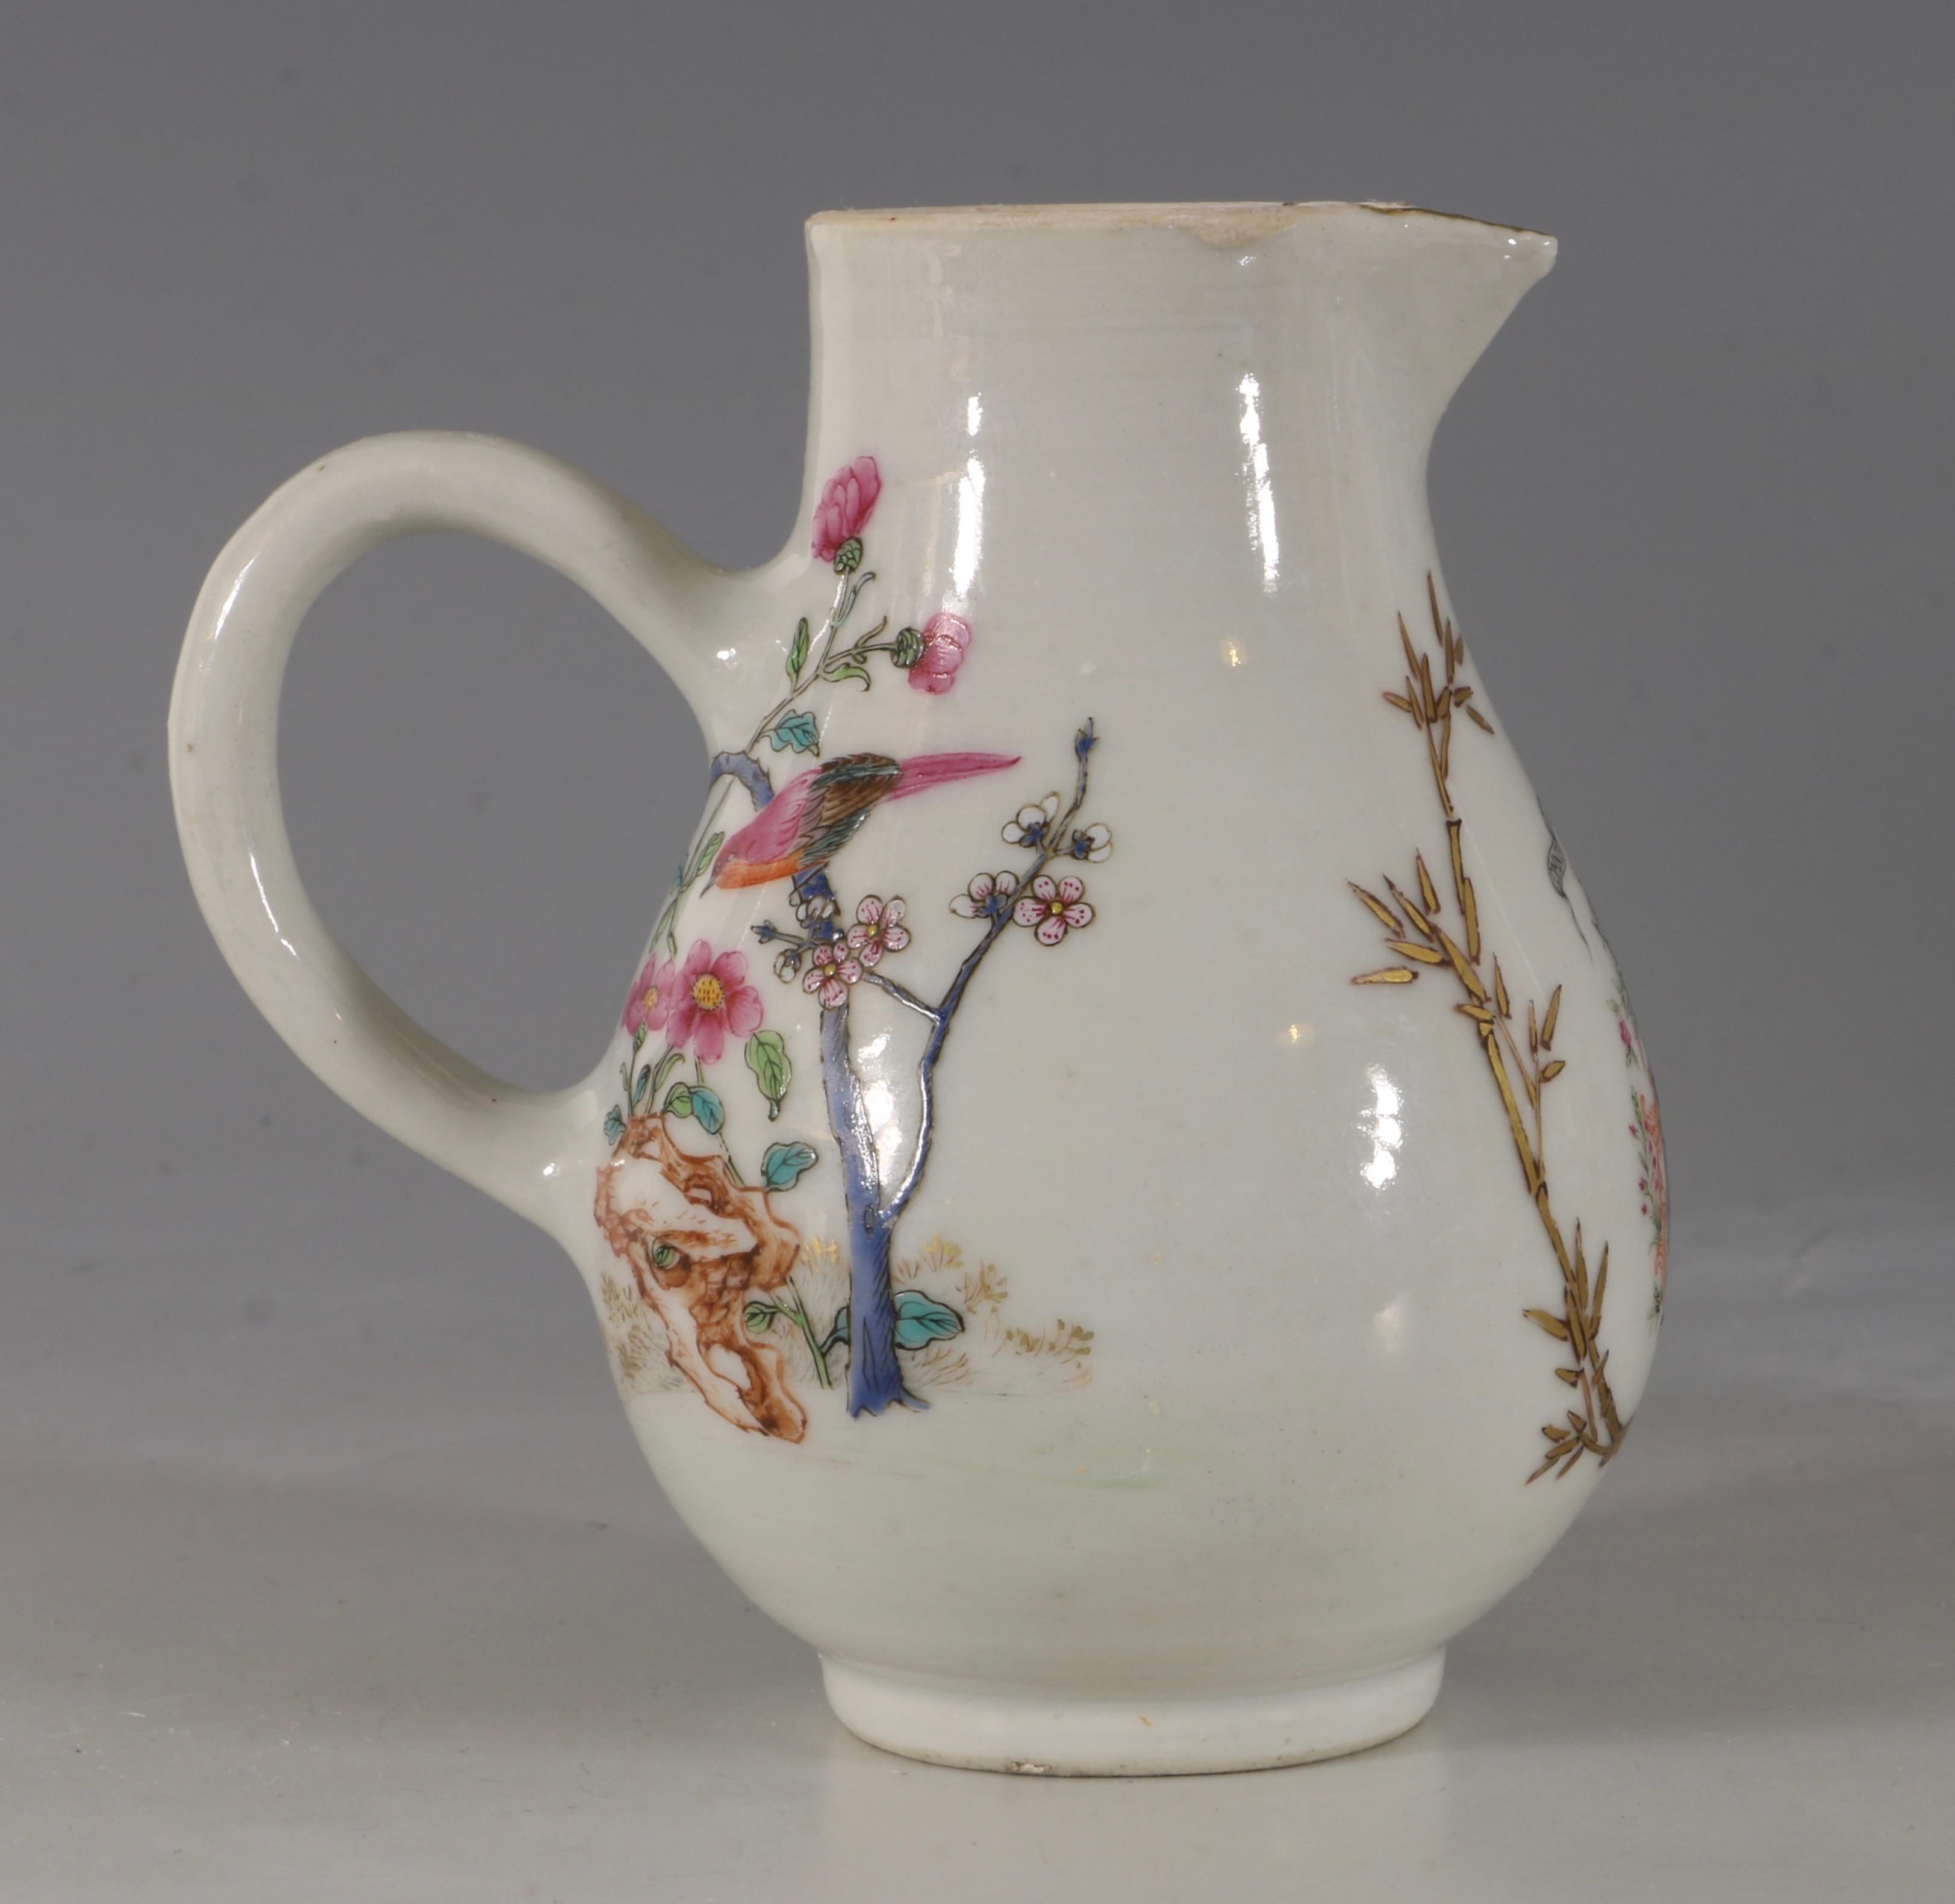 An armorial cream jug with a finely drawn coat of arms within bamboo sprays below the motto 'Omnia Vincit Labor' (Work conquers all).

The reverse attractively decorated with two birds, one perched on prunus the other on a rock.

The decoration